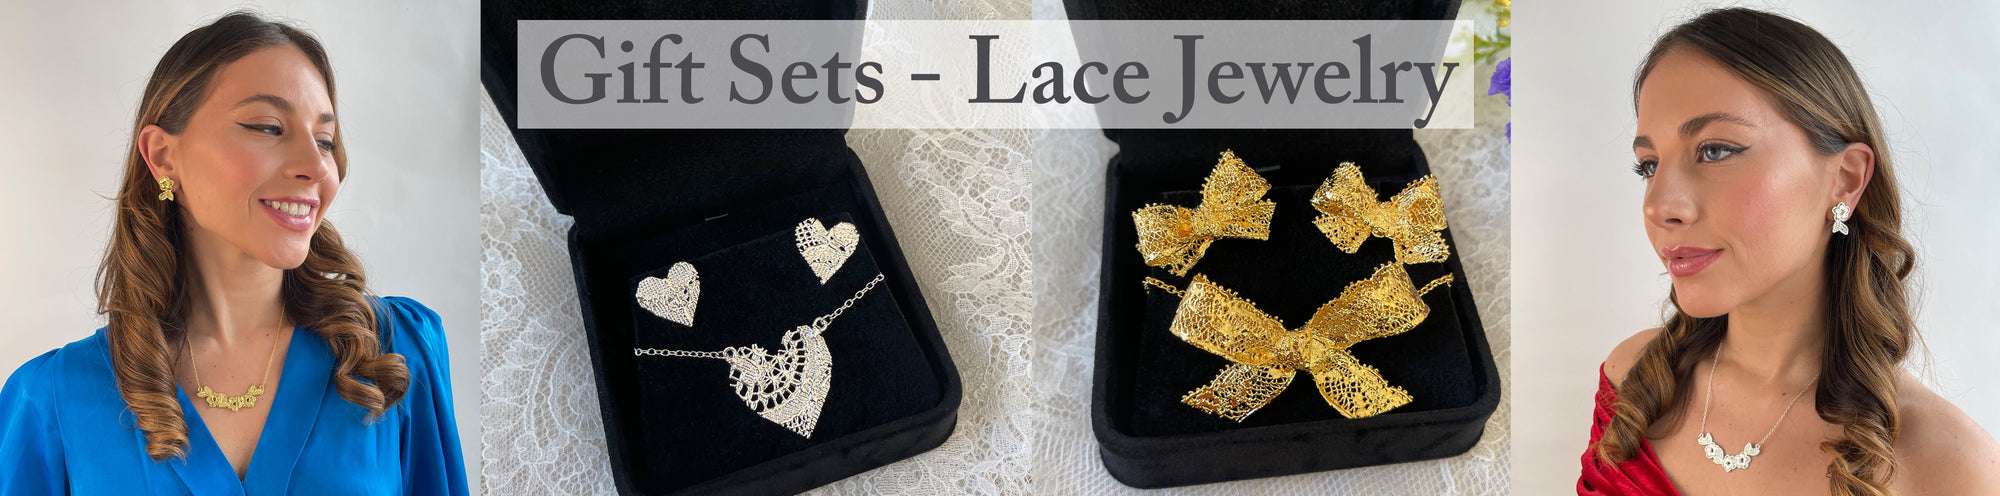 Gift Sets Lace Jewelry